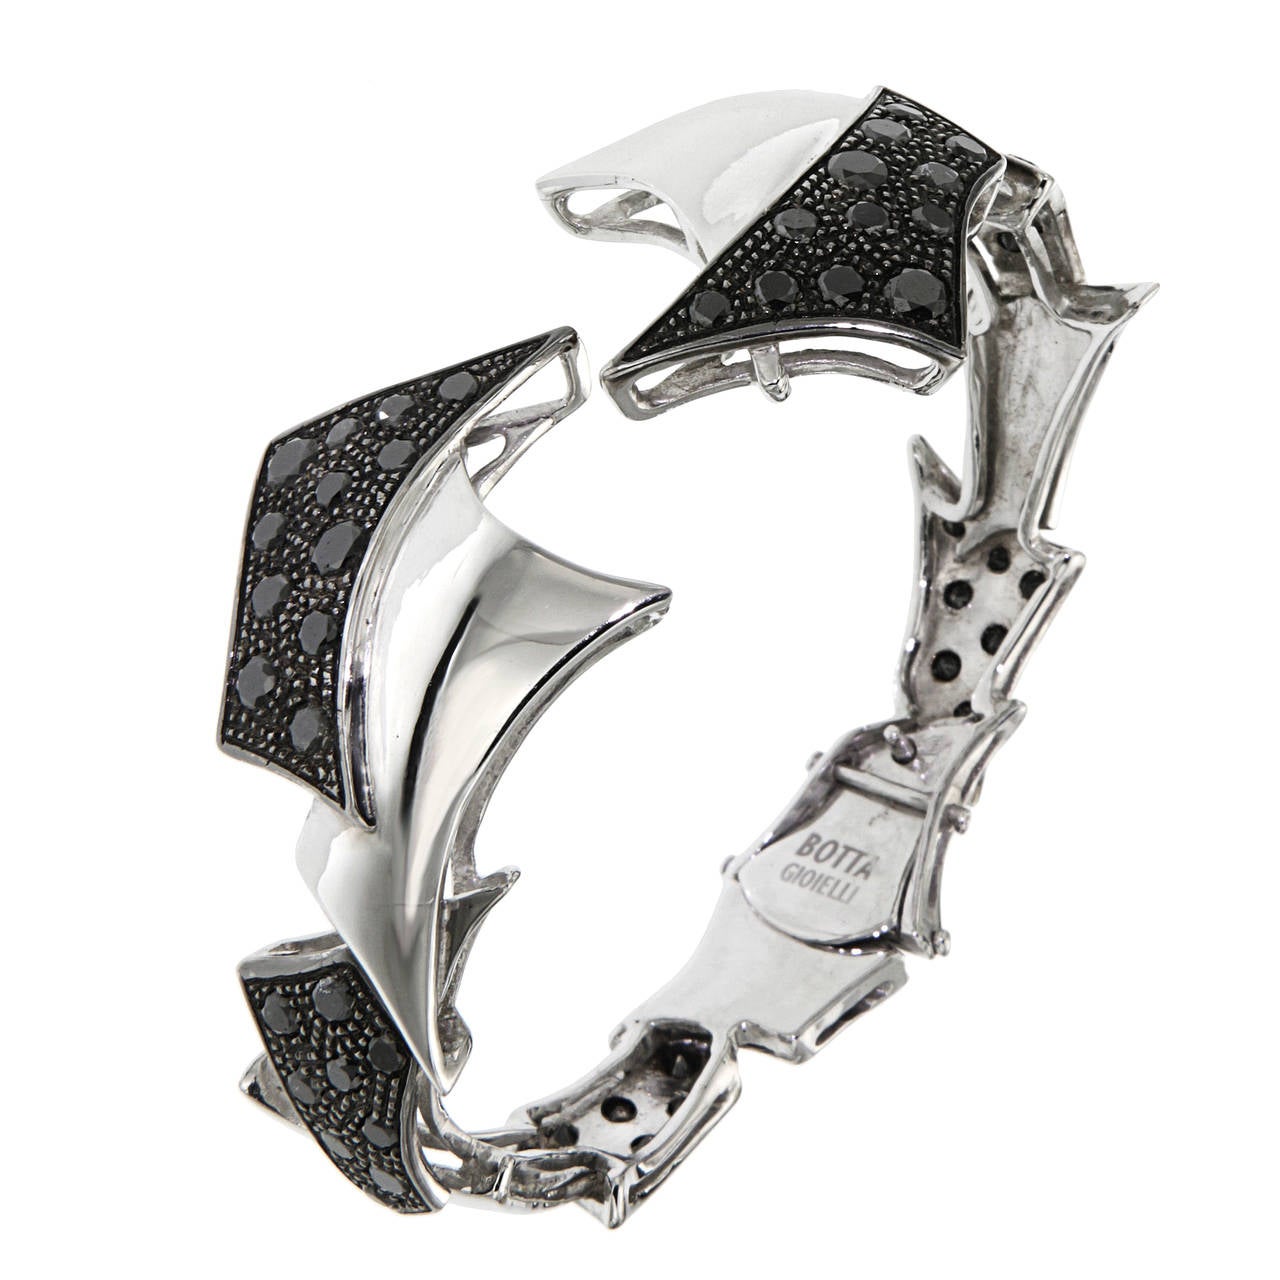 Black Diamonds White Gold Bracelet Handcrafted In Italy By Botta Gioielli